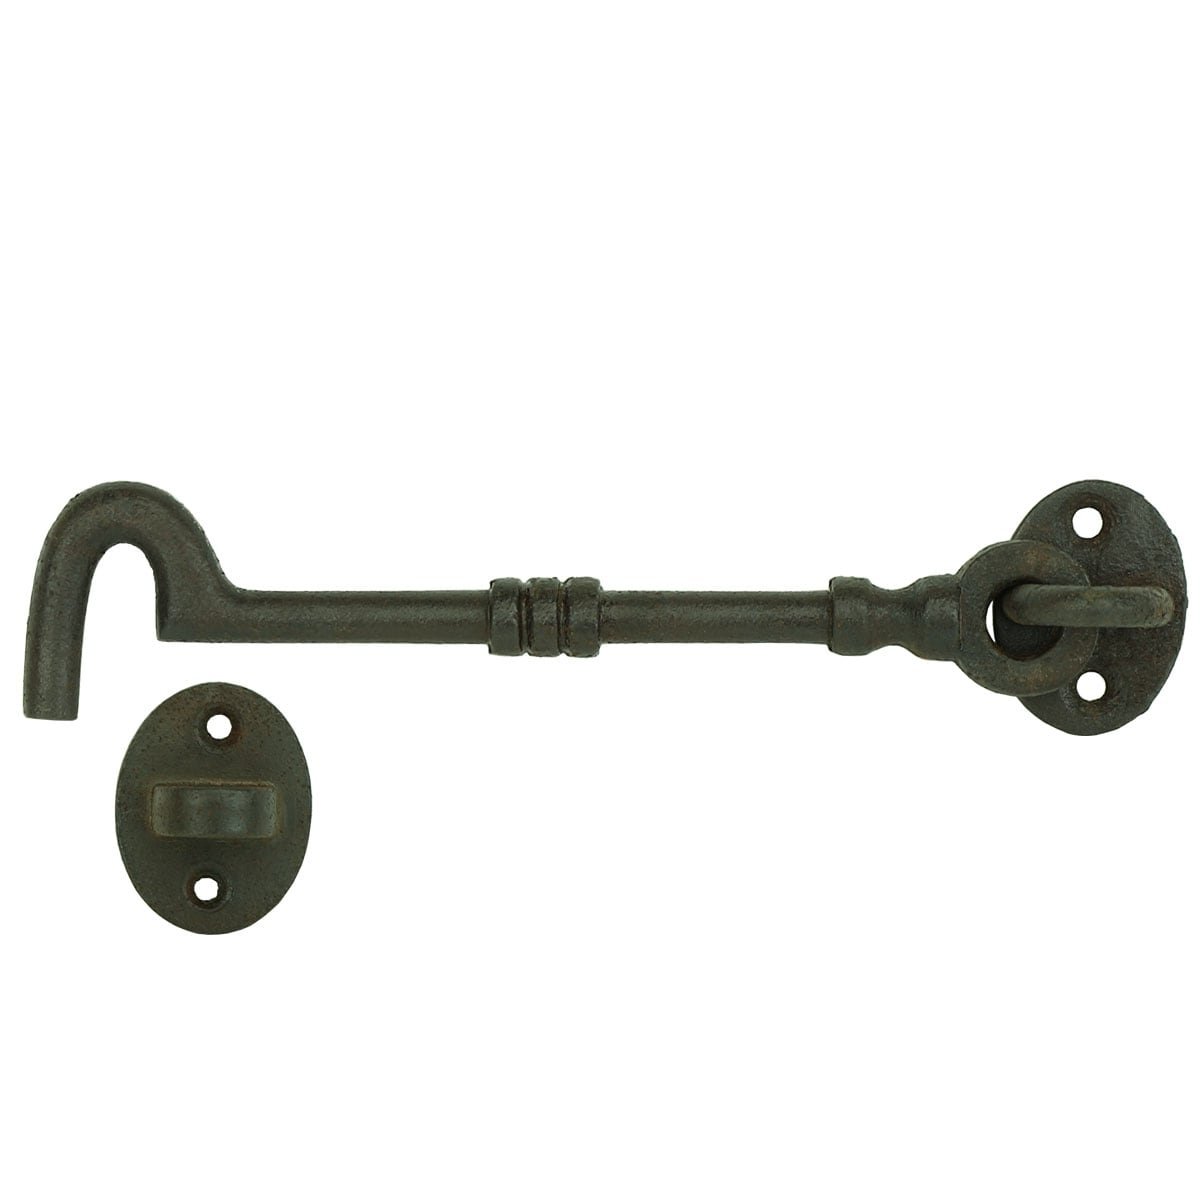 Hook front door old fashioned iron - 150 mm